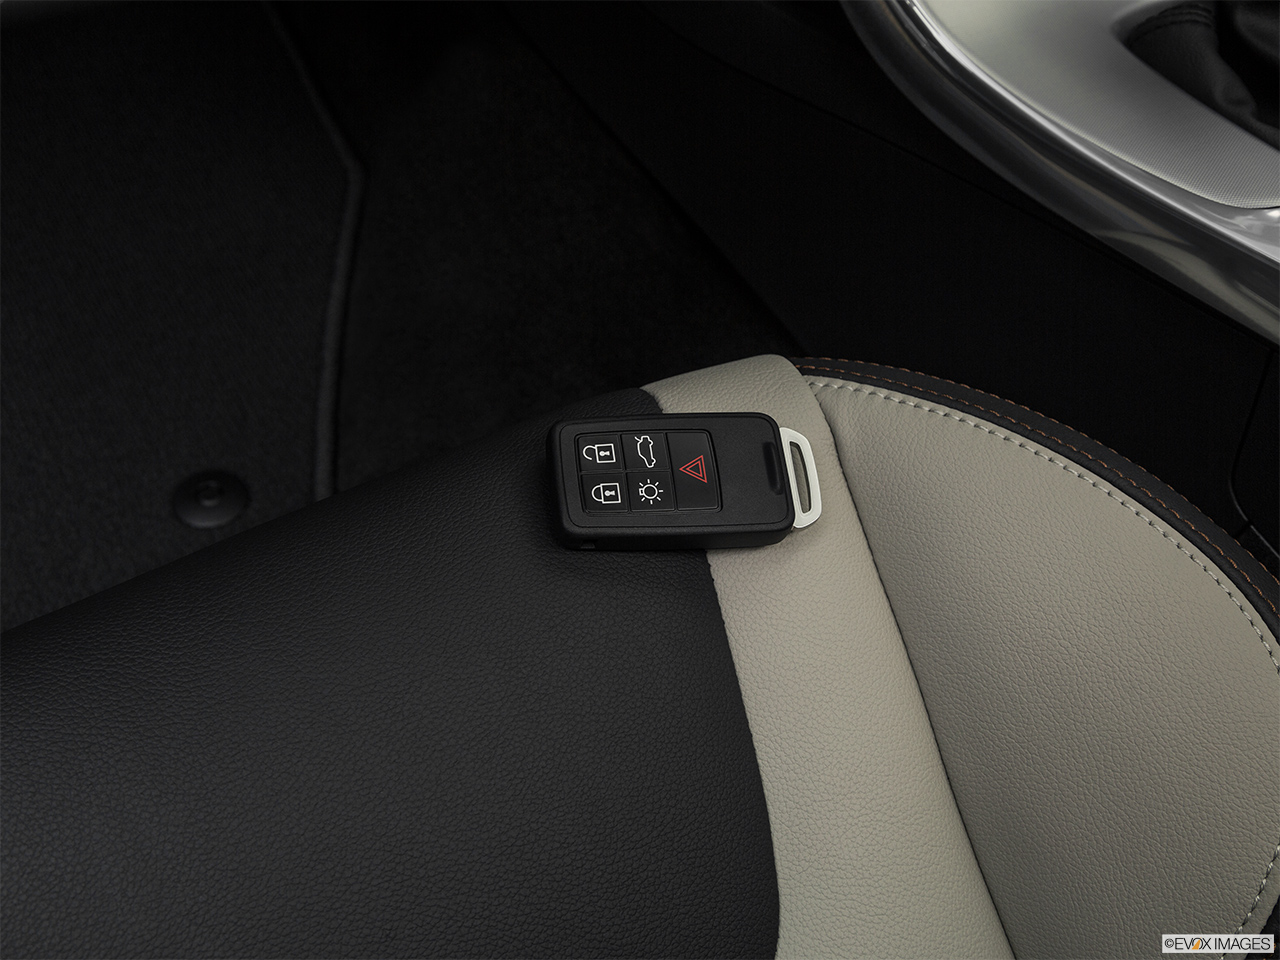 2018 Volvo S60 Cross Country T5 AWD Key fob on driver's seat. 